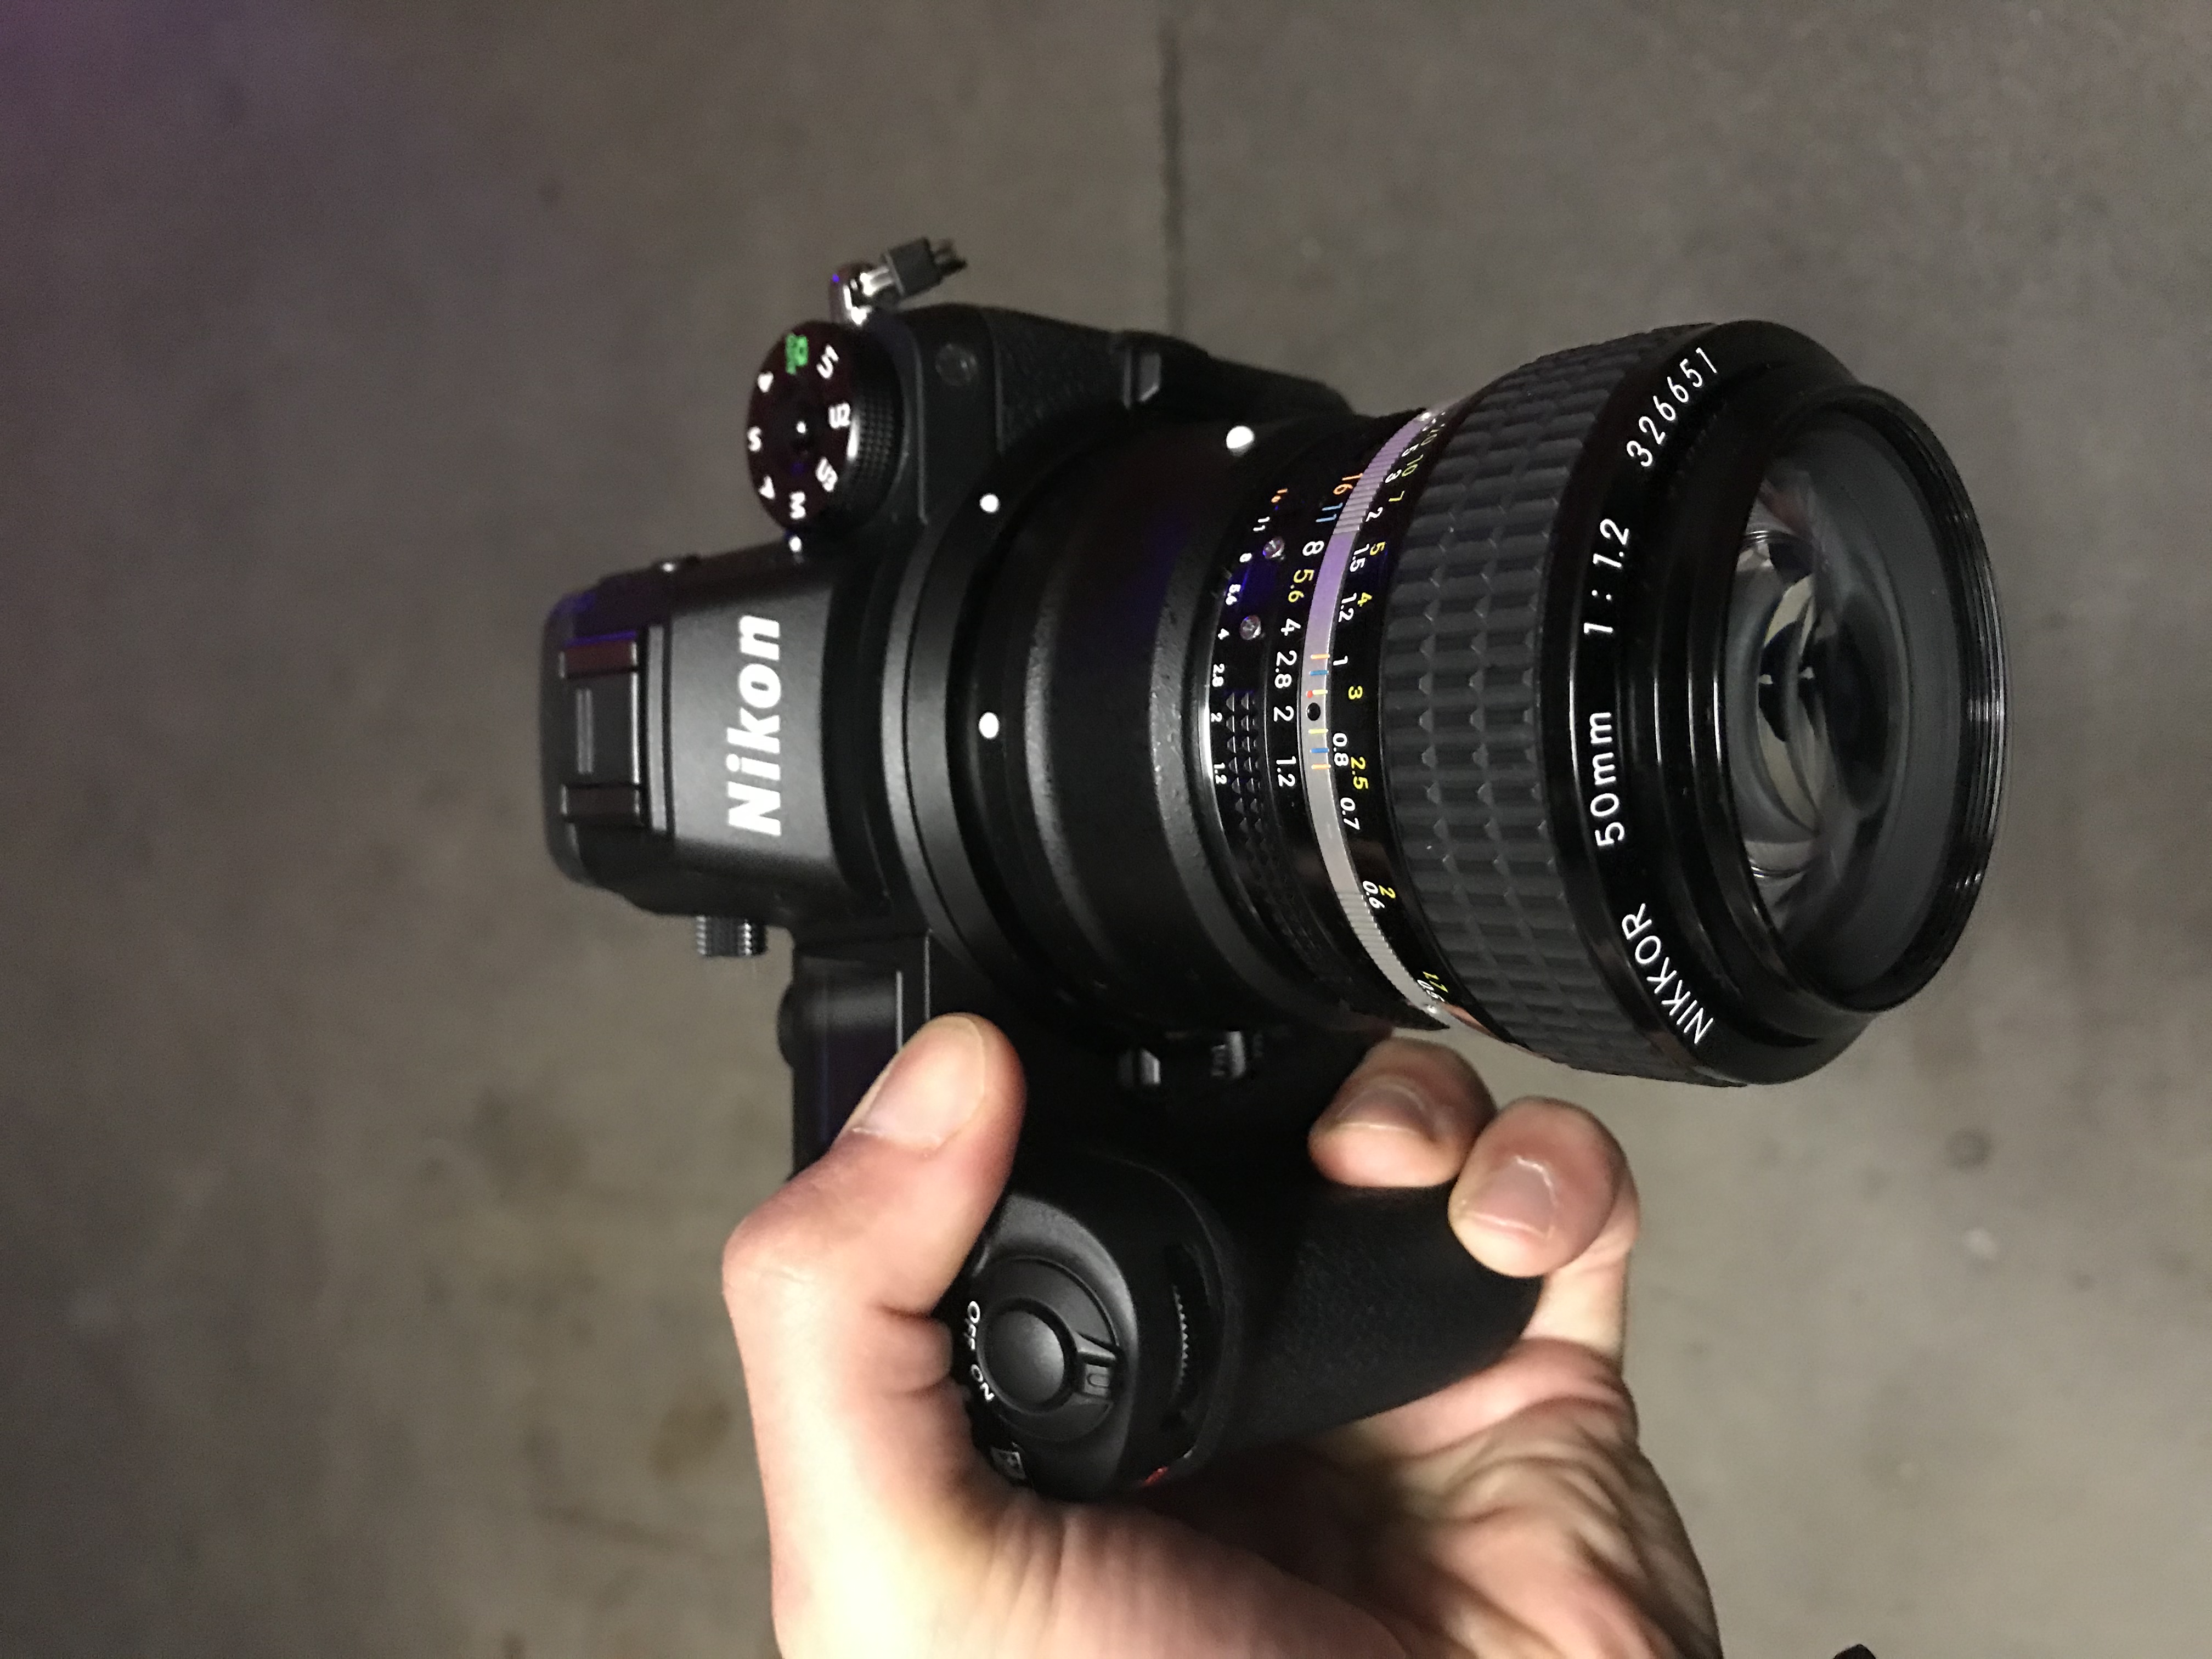 Nikkor 50mm f/1.2 AI-S on the Z6